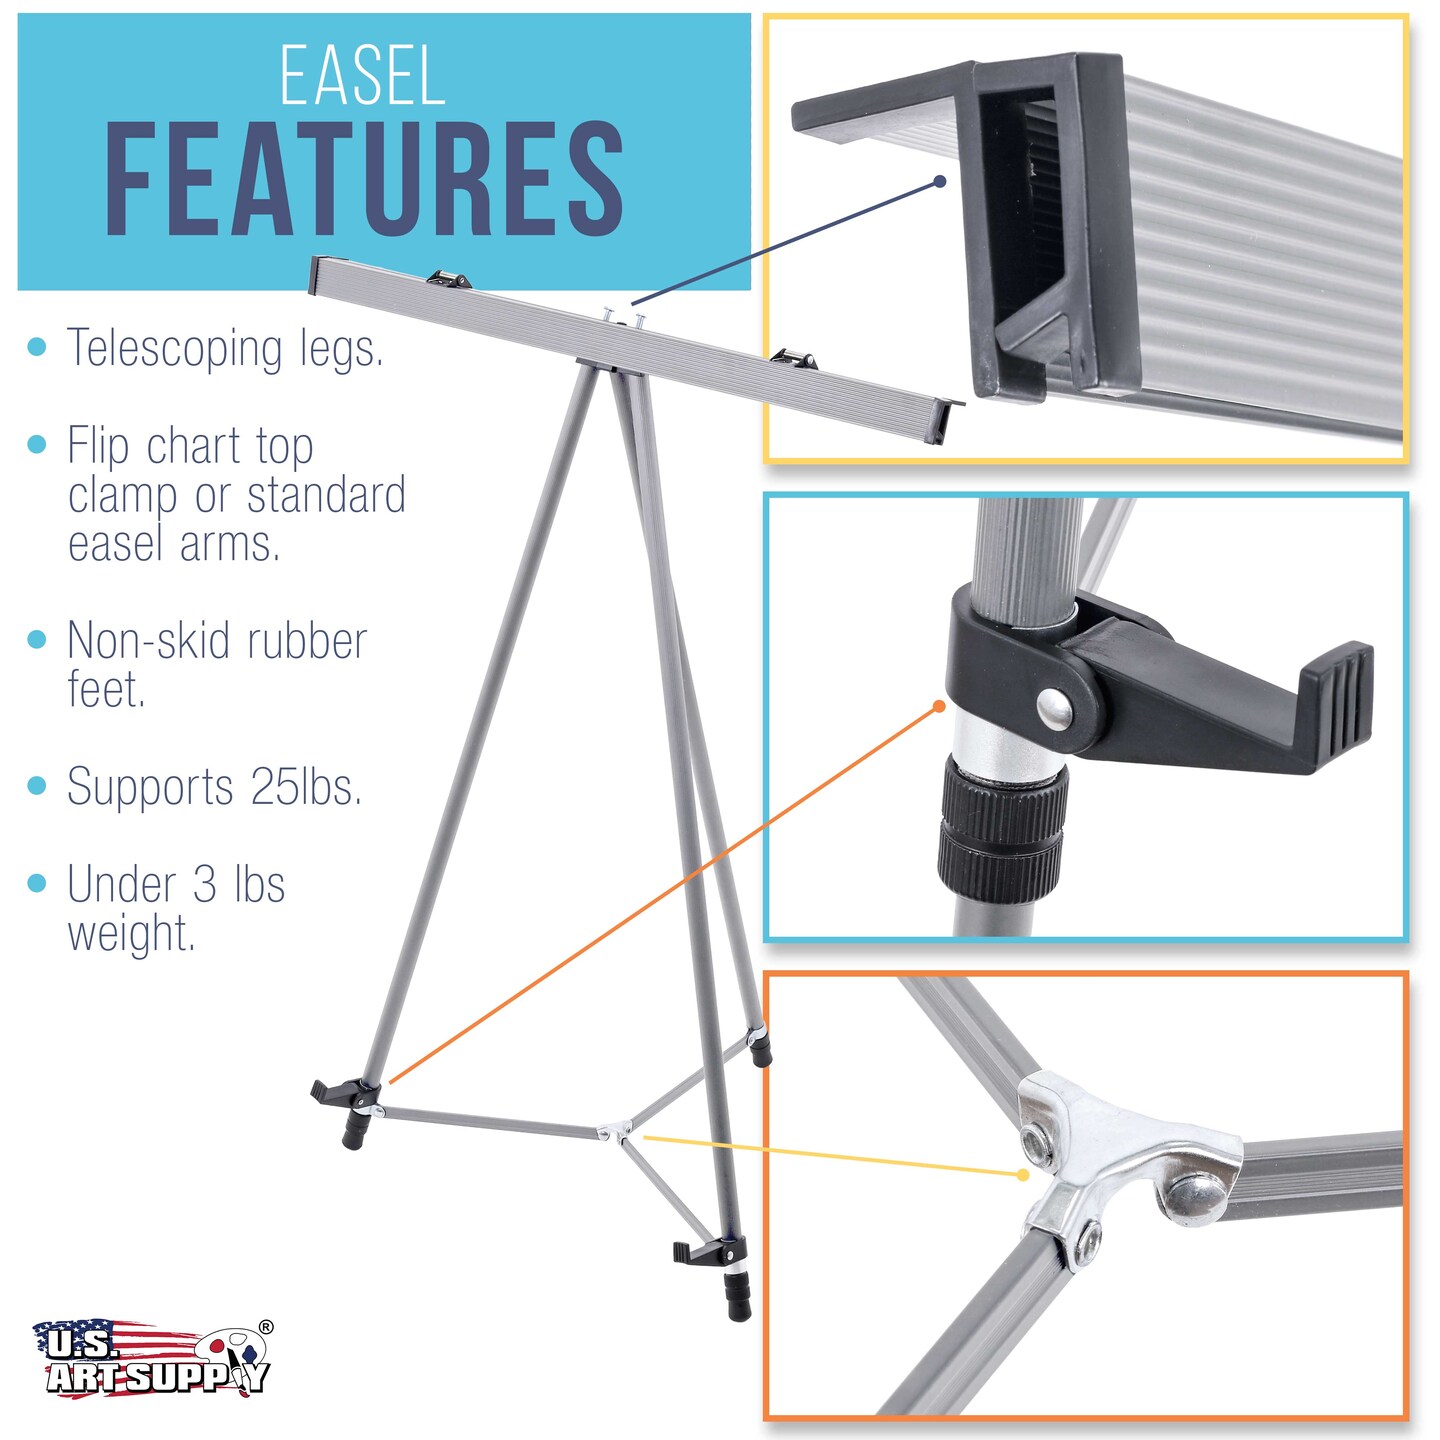 66&#x22; High Classroom Silver Aluminum Flipchart Display Easel and Presentation Stand (Pack of 4) - Large Adjustable Floor and Tabletop Portable Tripod